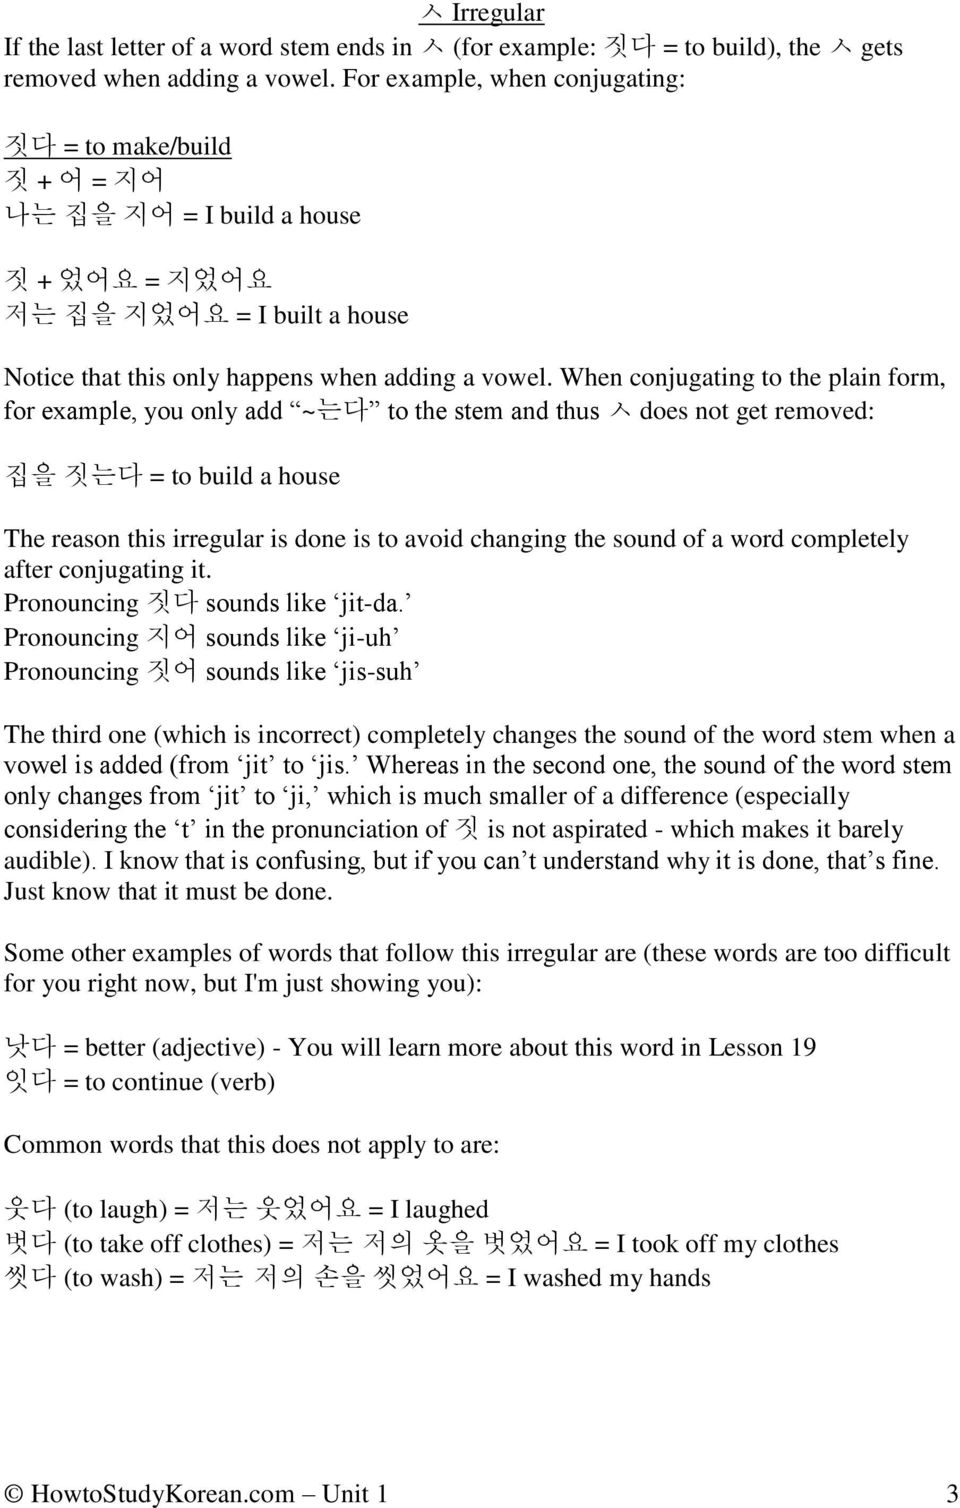 When conjugating to the plain form, for example, you only add ~는다 to the stem and thus ㅅ does not get removed: 집을 짓는다 = to build a house The reason this irregular is done is to avoid changing the